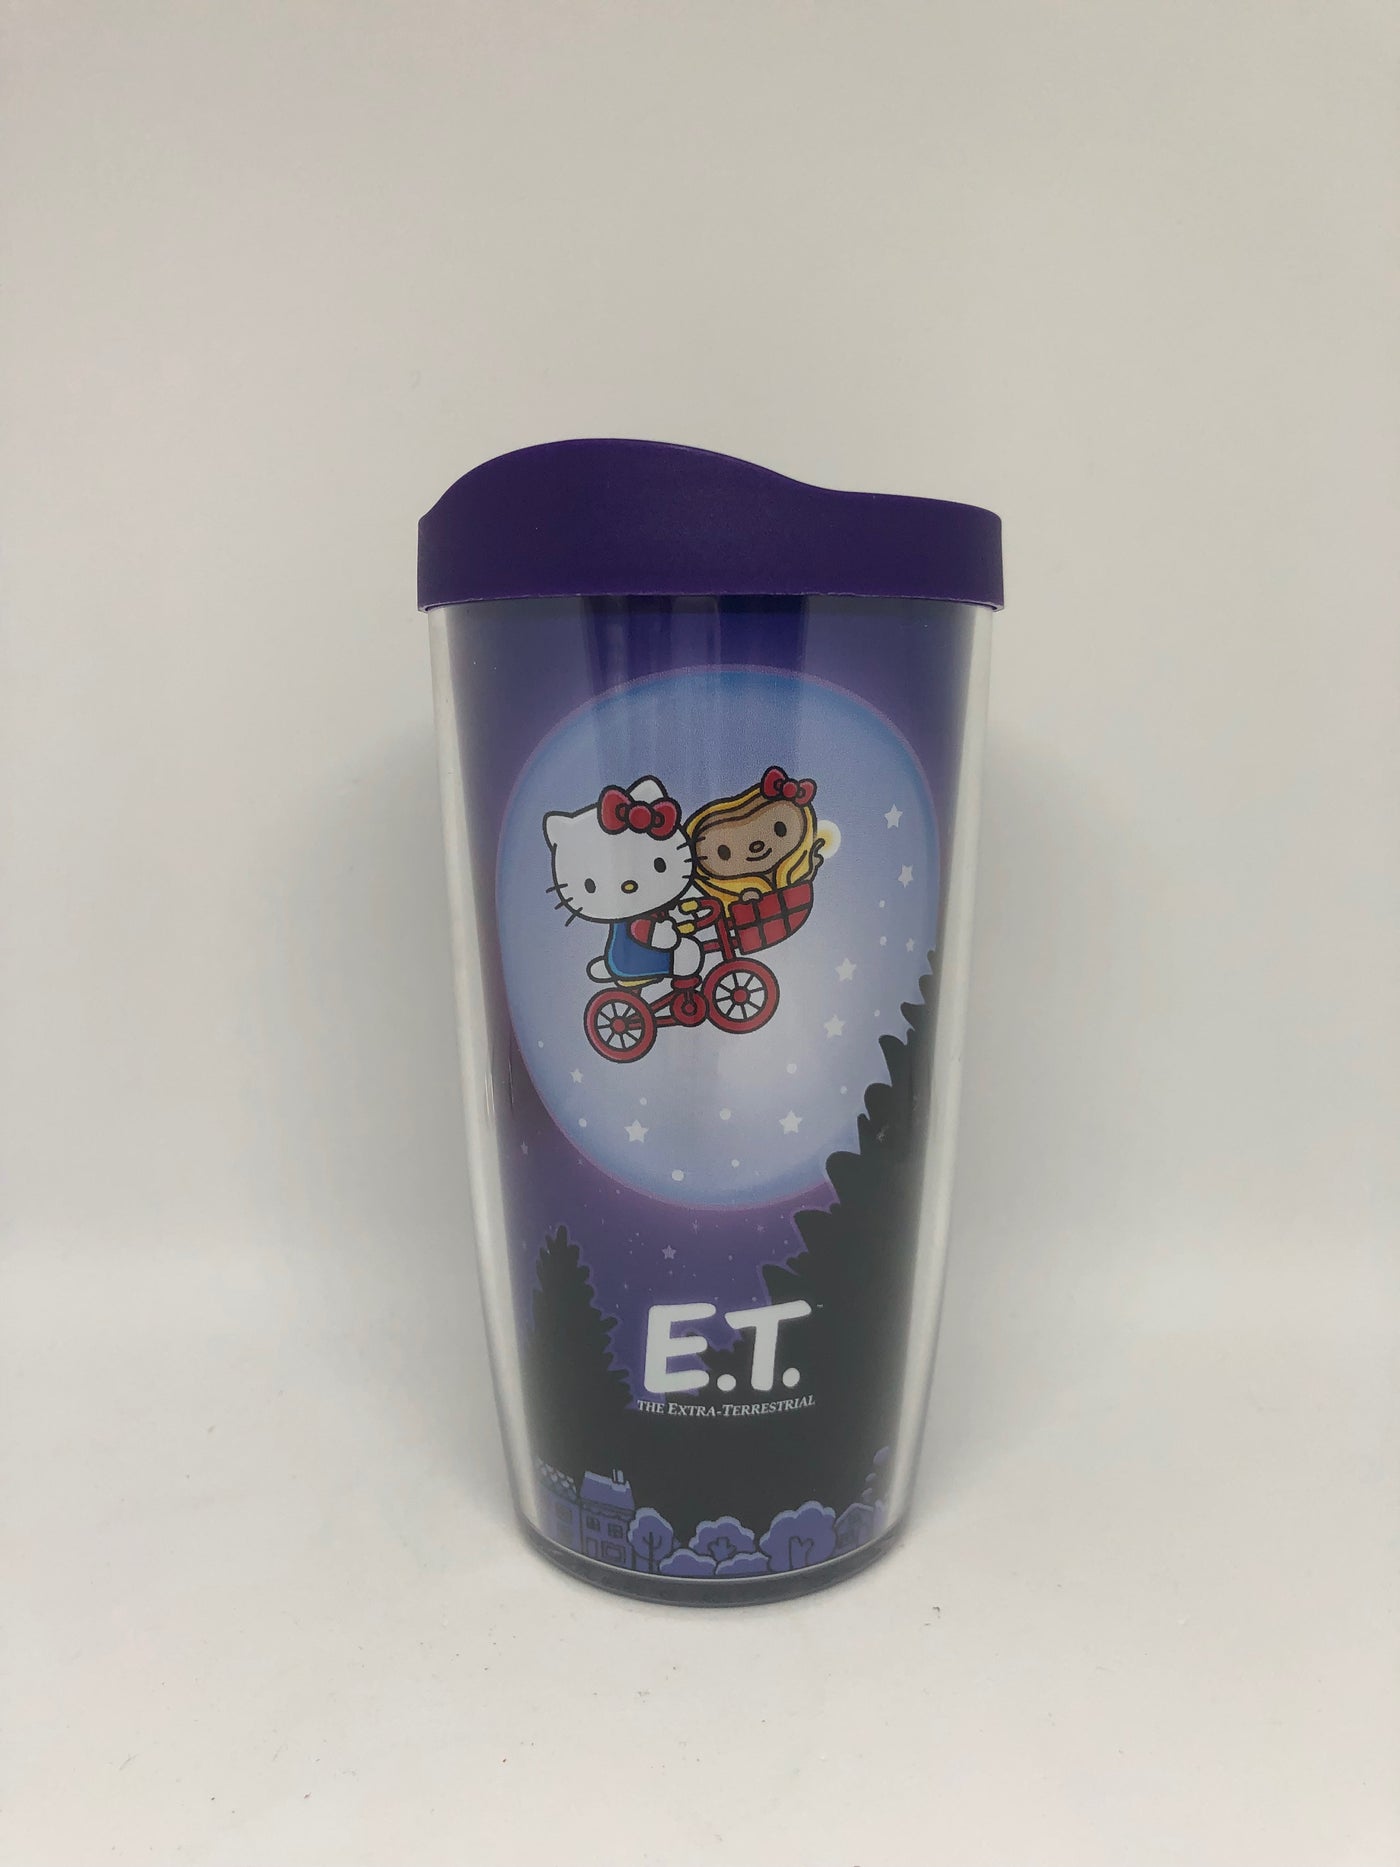 Universal Studios Hello Kitty with E.T. The Extra Terrestrial Tervis Tumbler New